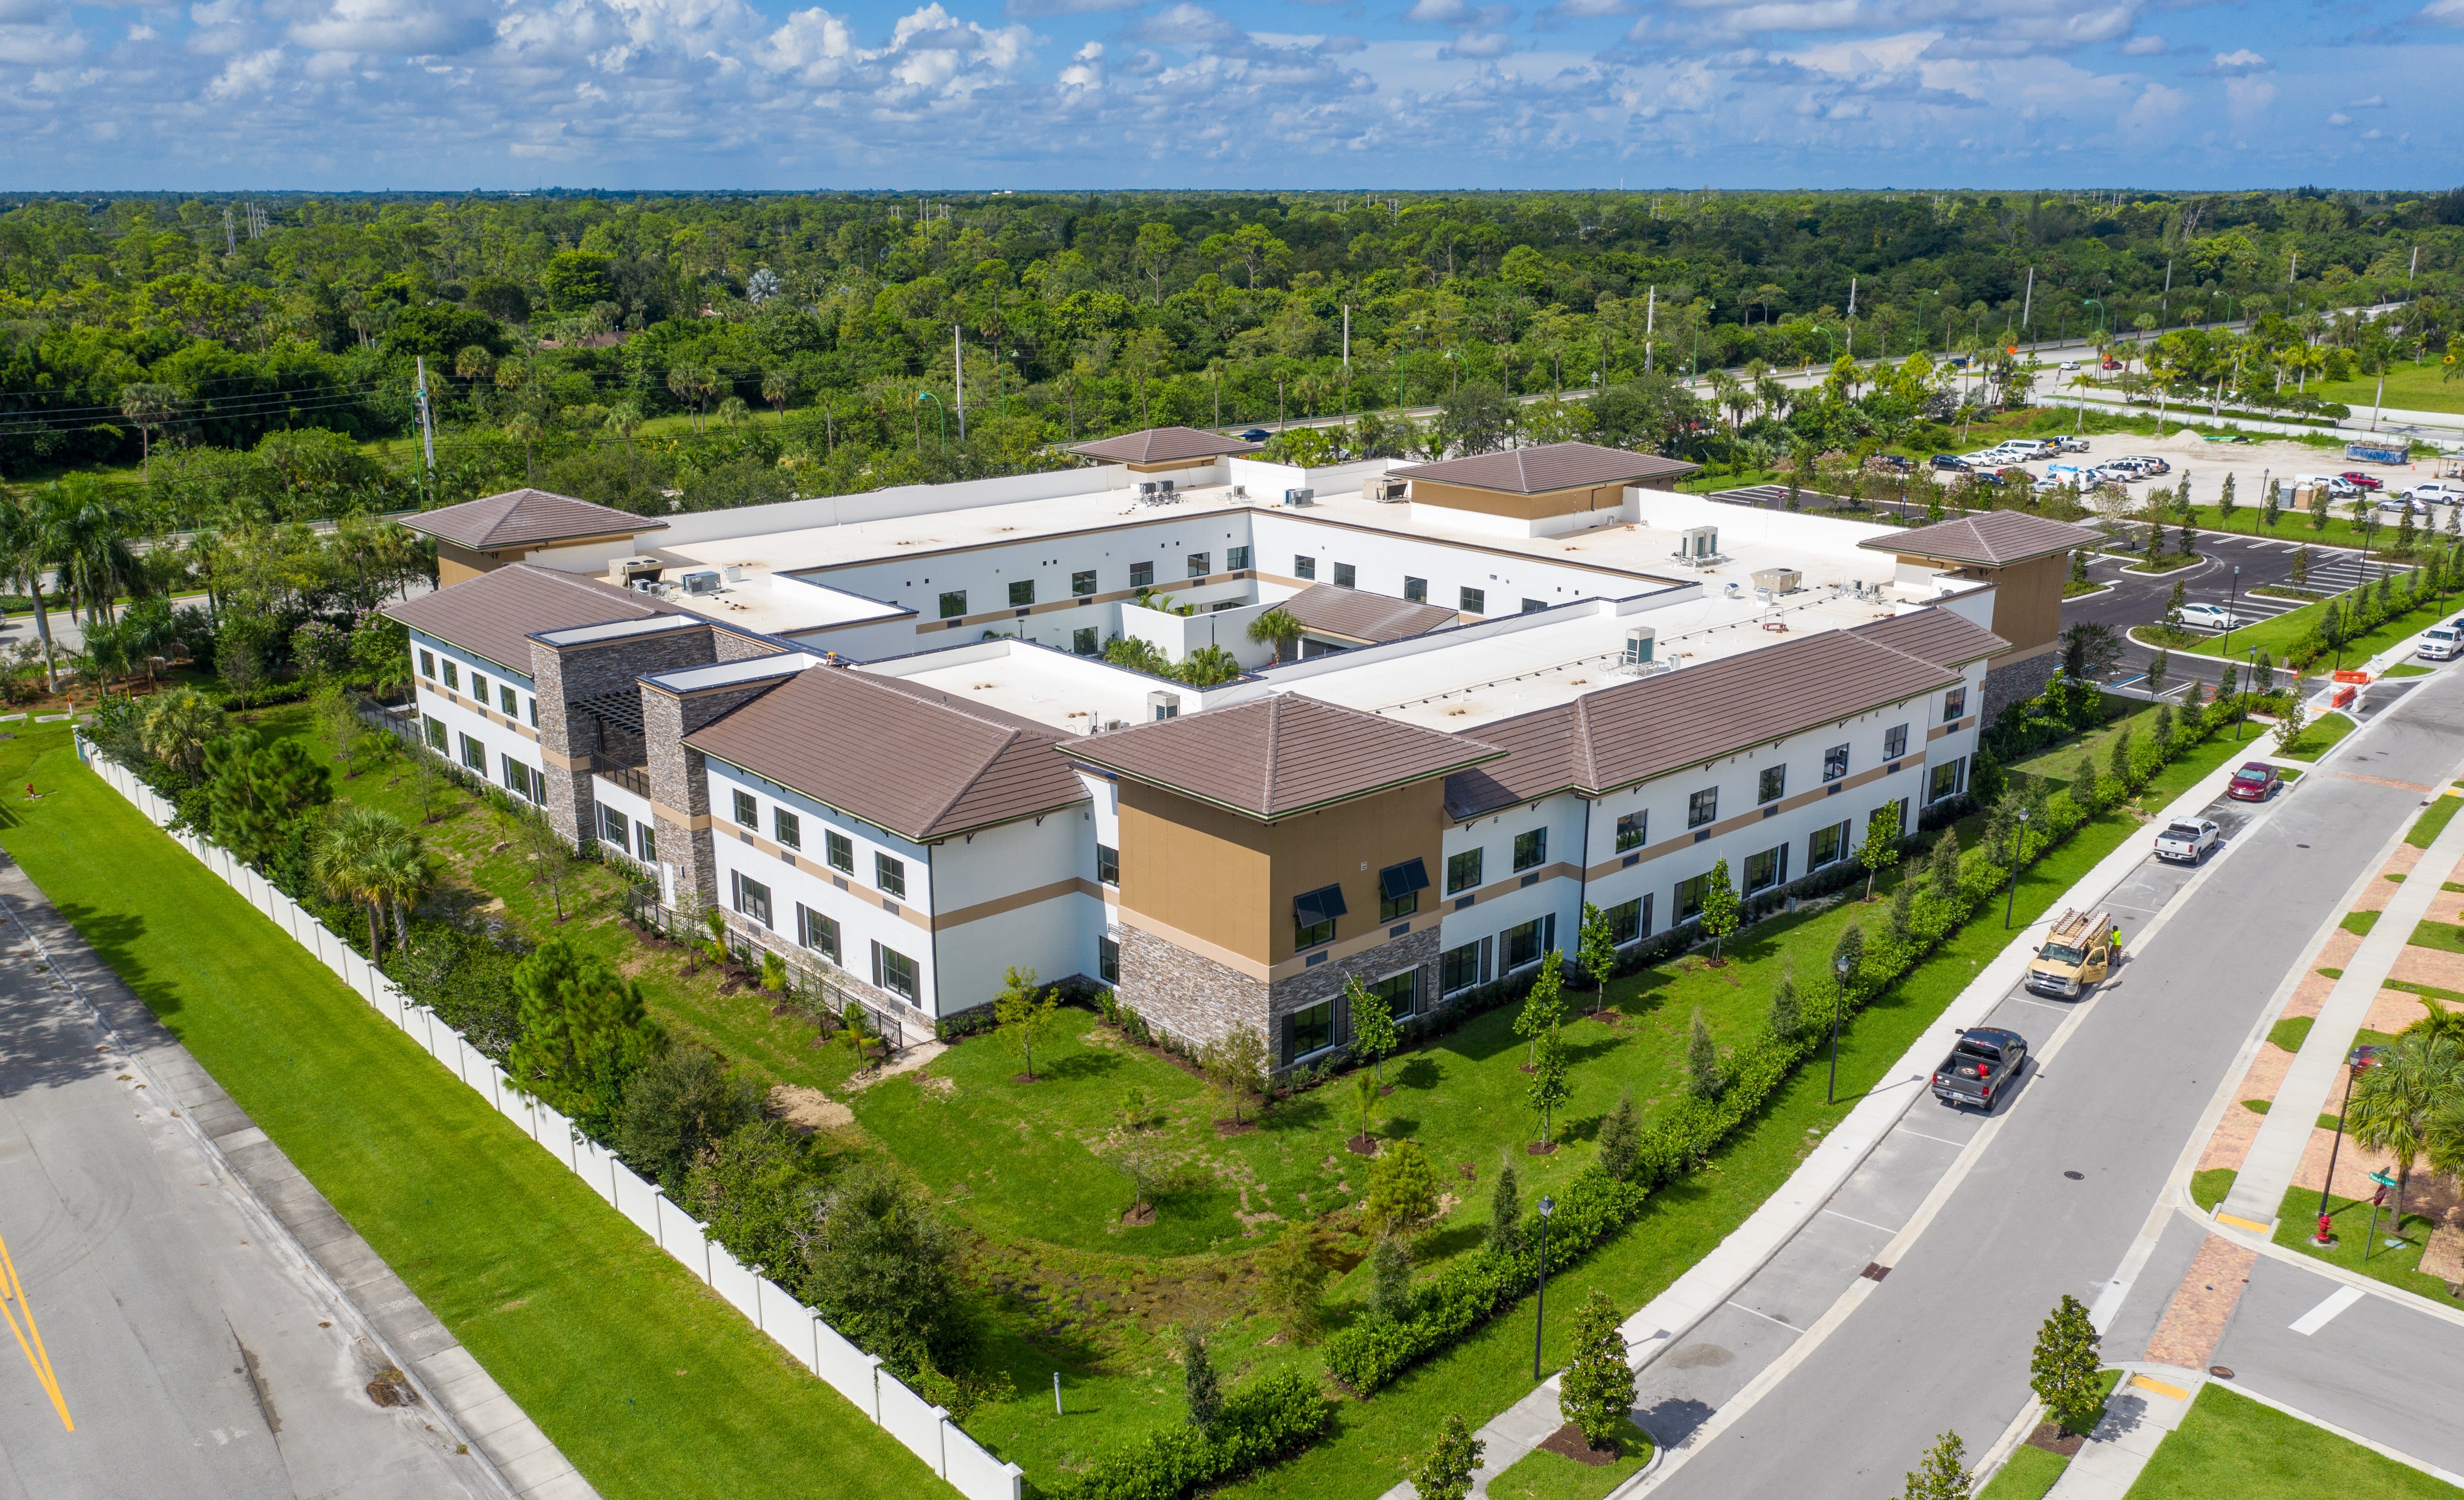 View our services and amenities at Inspired Living Royal Palm Beach in Royal Palm Beach, Florida